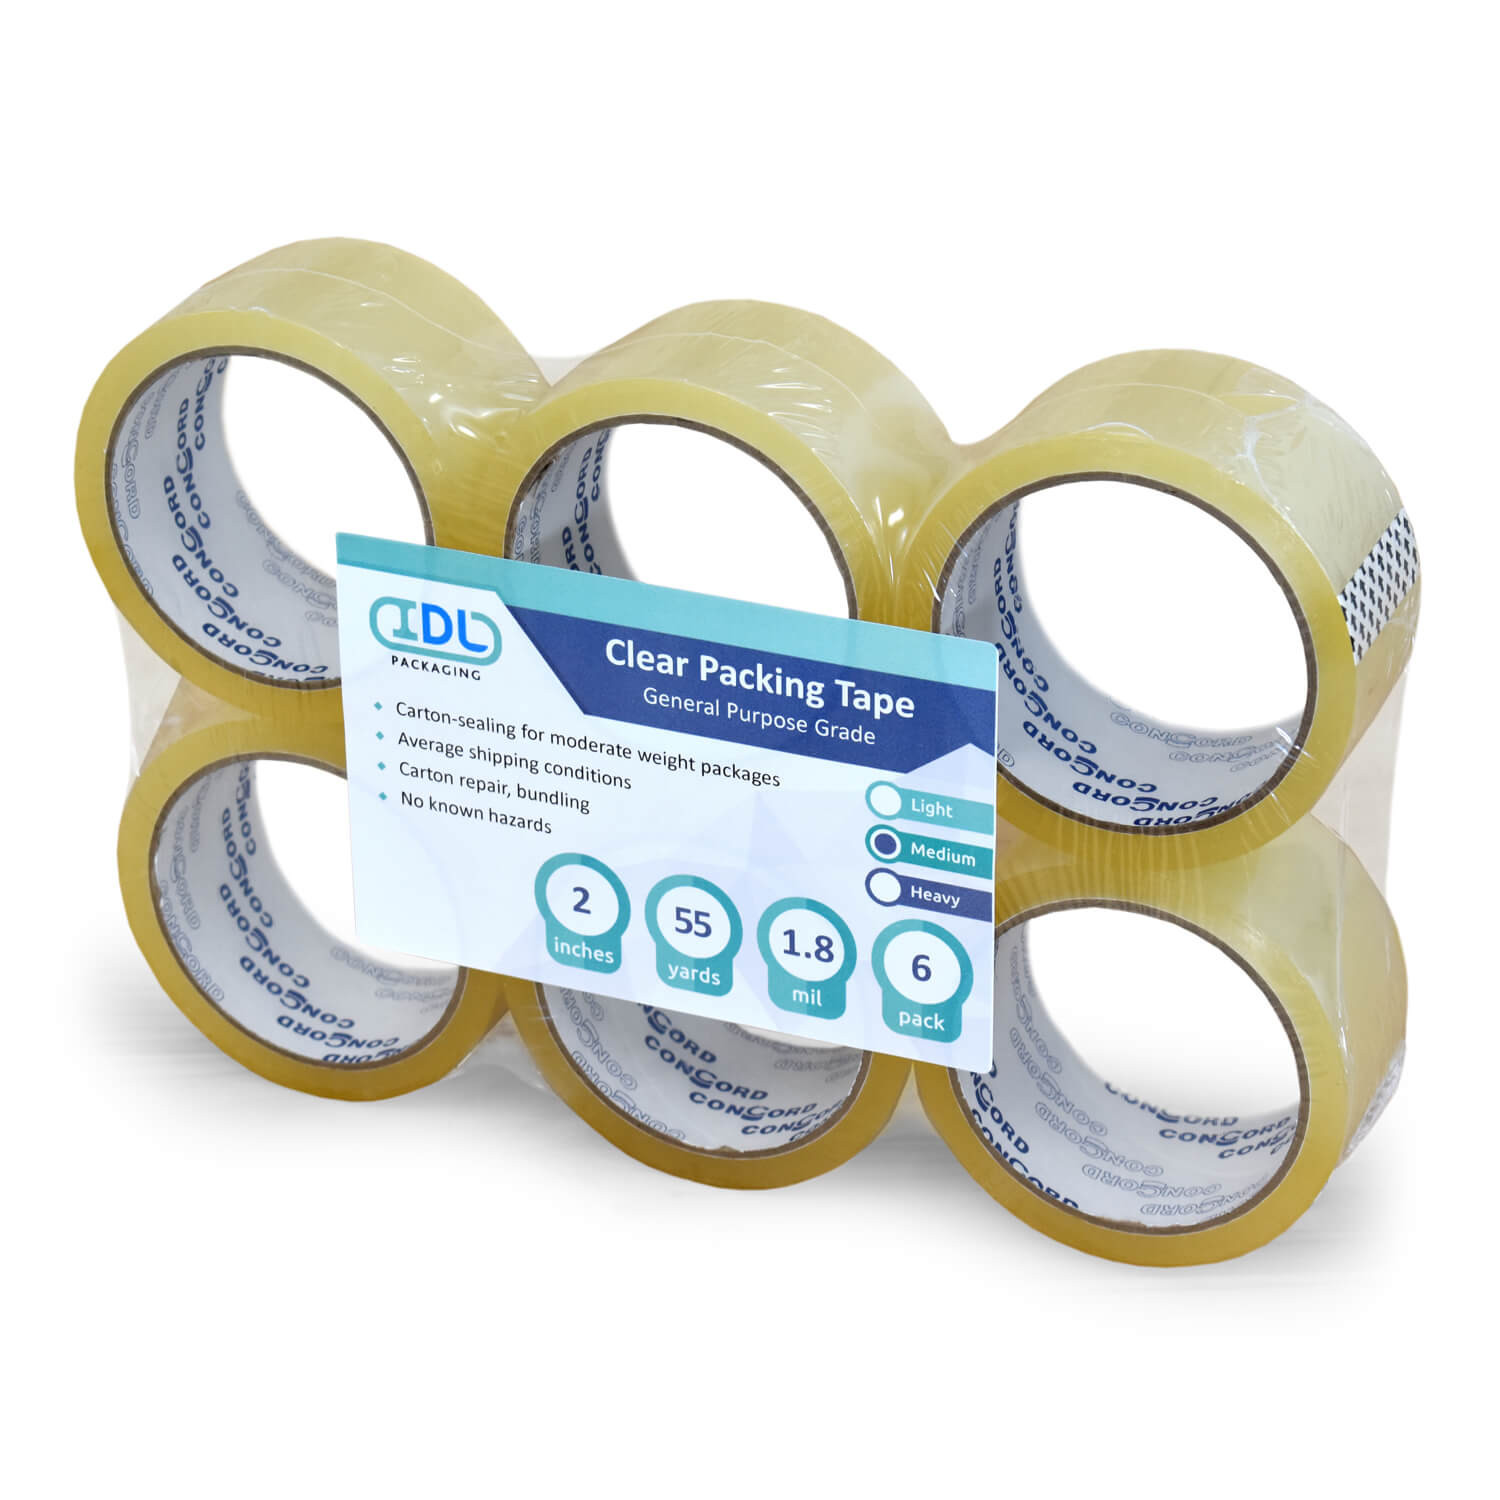 Concord Packing Tape 2 x 55 Yards, Clear (Pack of 36) buy in stock in U.S.  in IDL Packaging